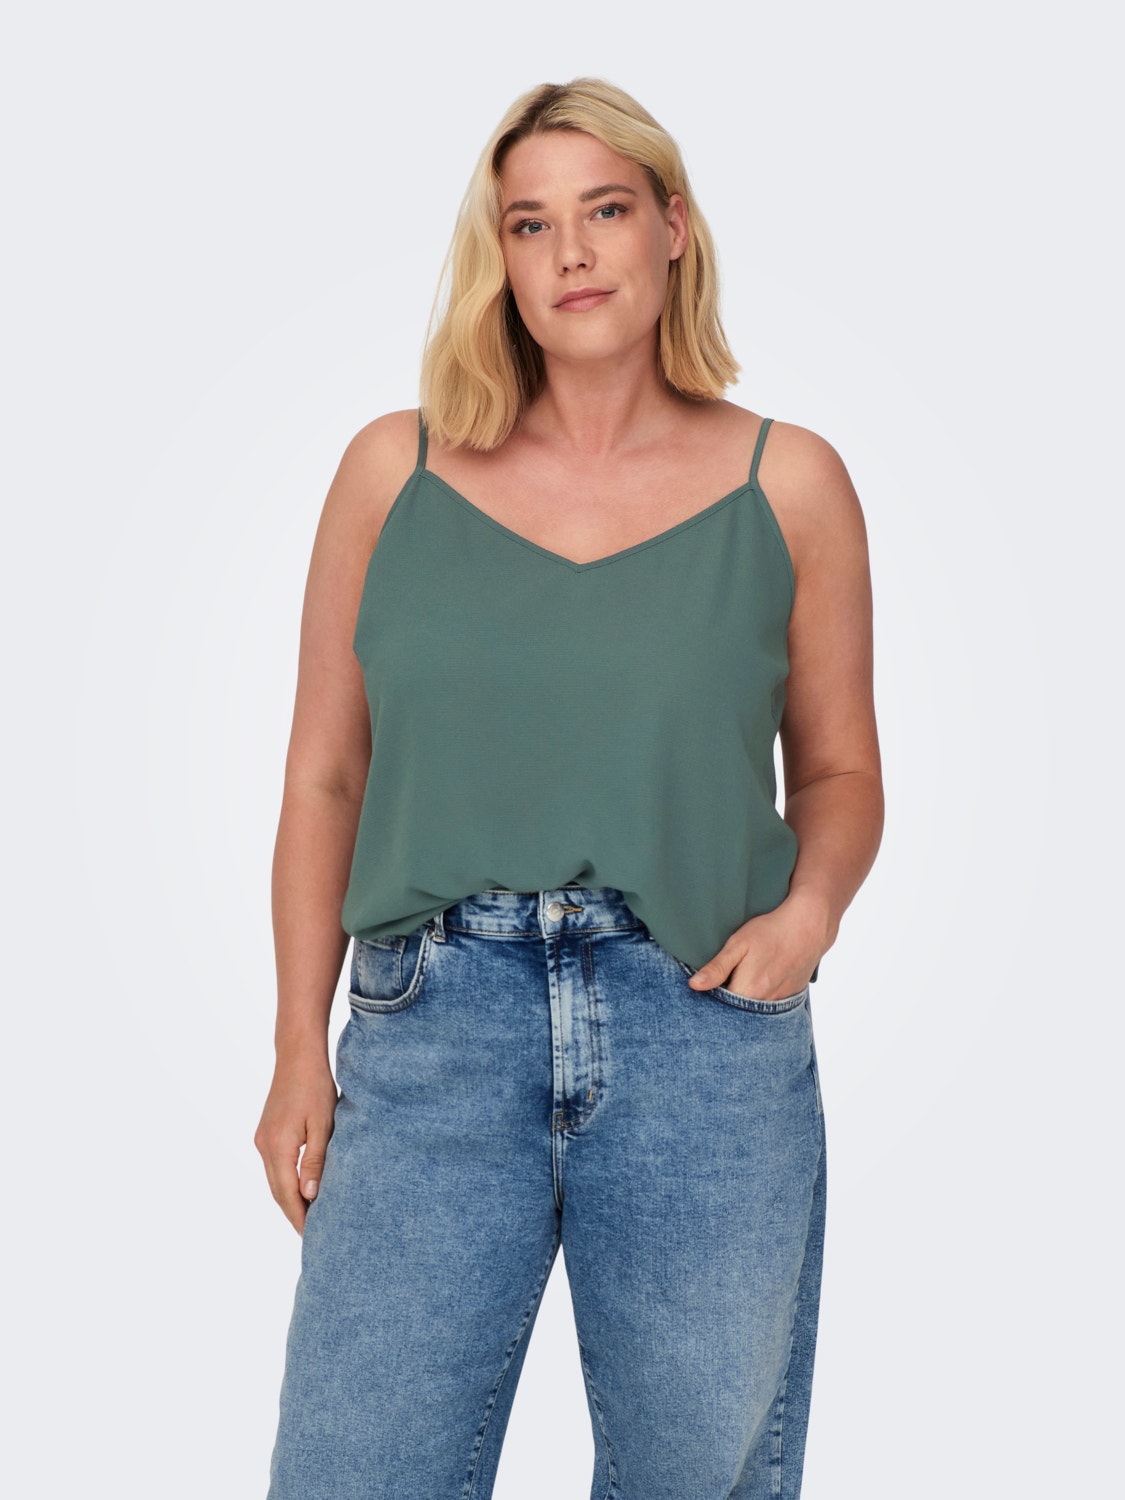 ONLY Curvy printed Top -Balsam Green - 15299244